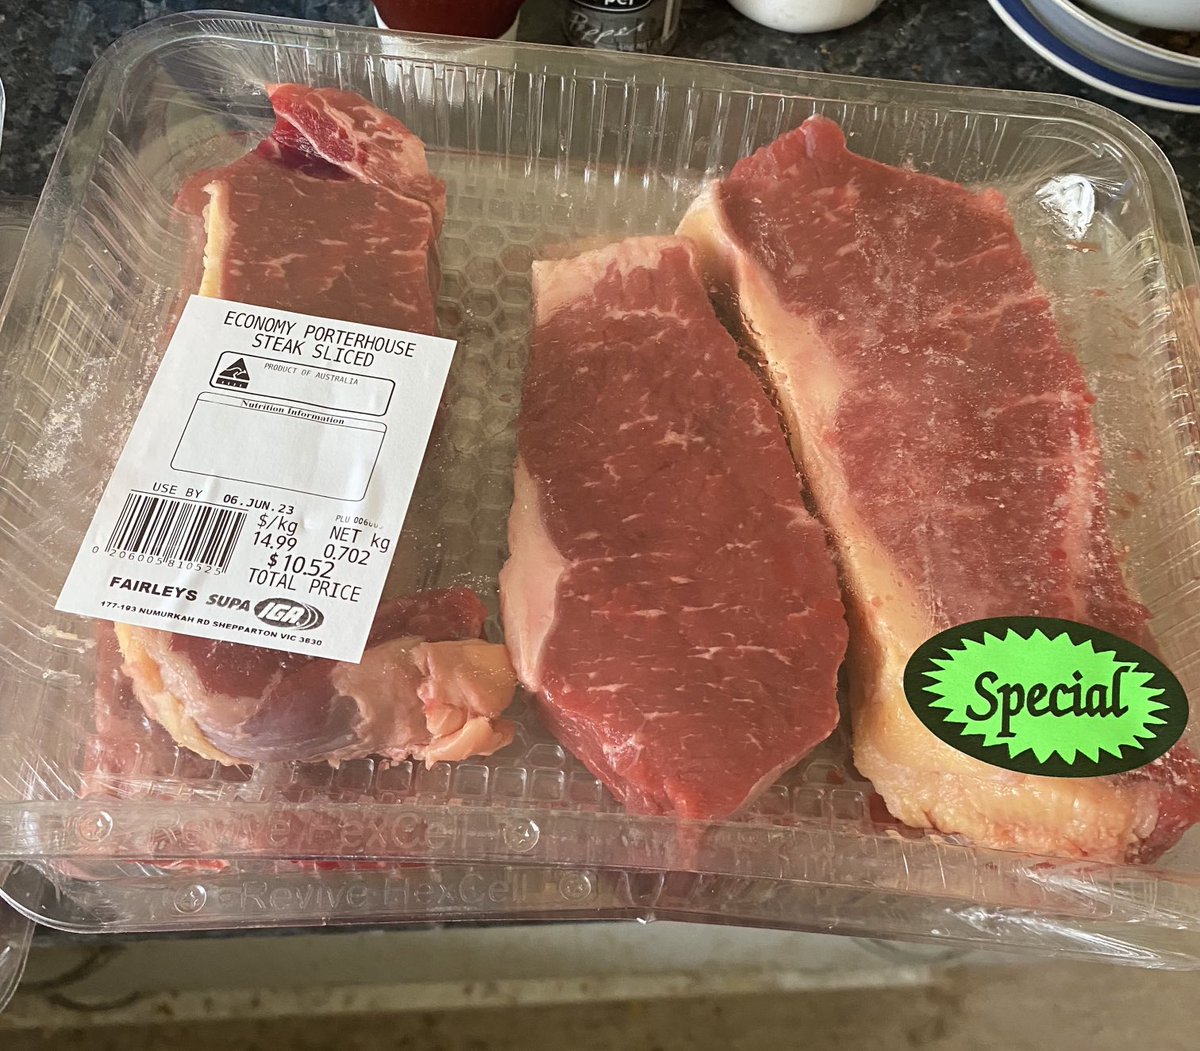 Done alright at my local IGA supermarket today!27 pieces of porterhouse steak & 12 bbq chops for $120!